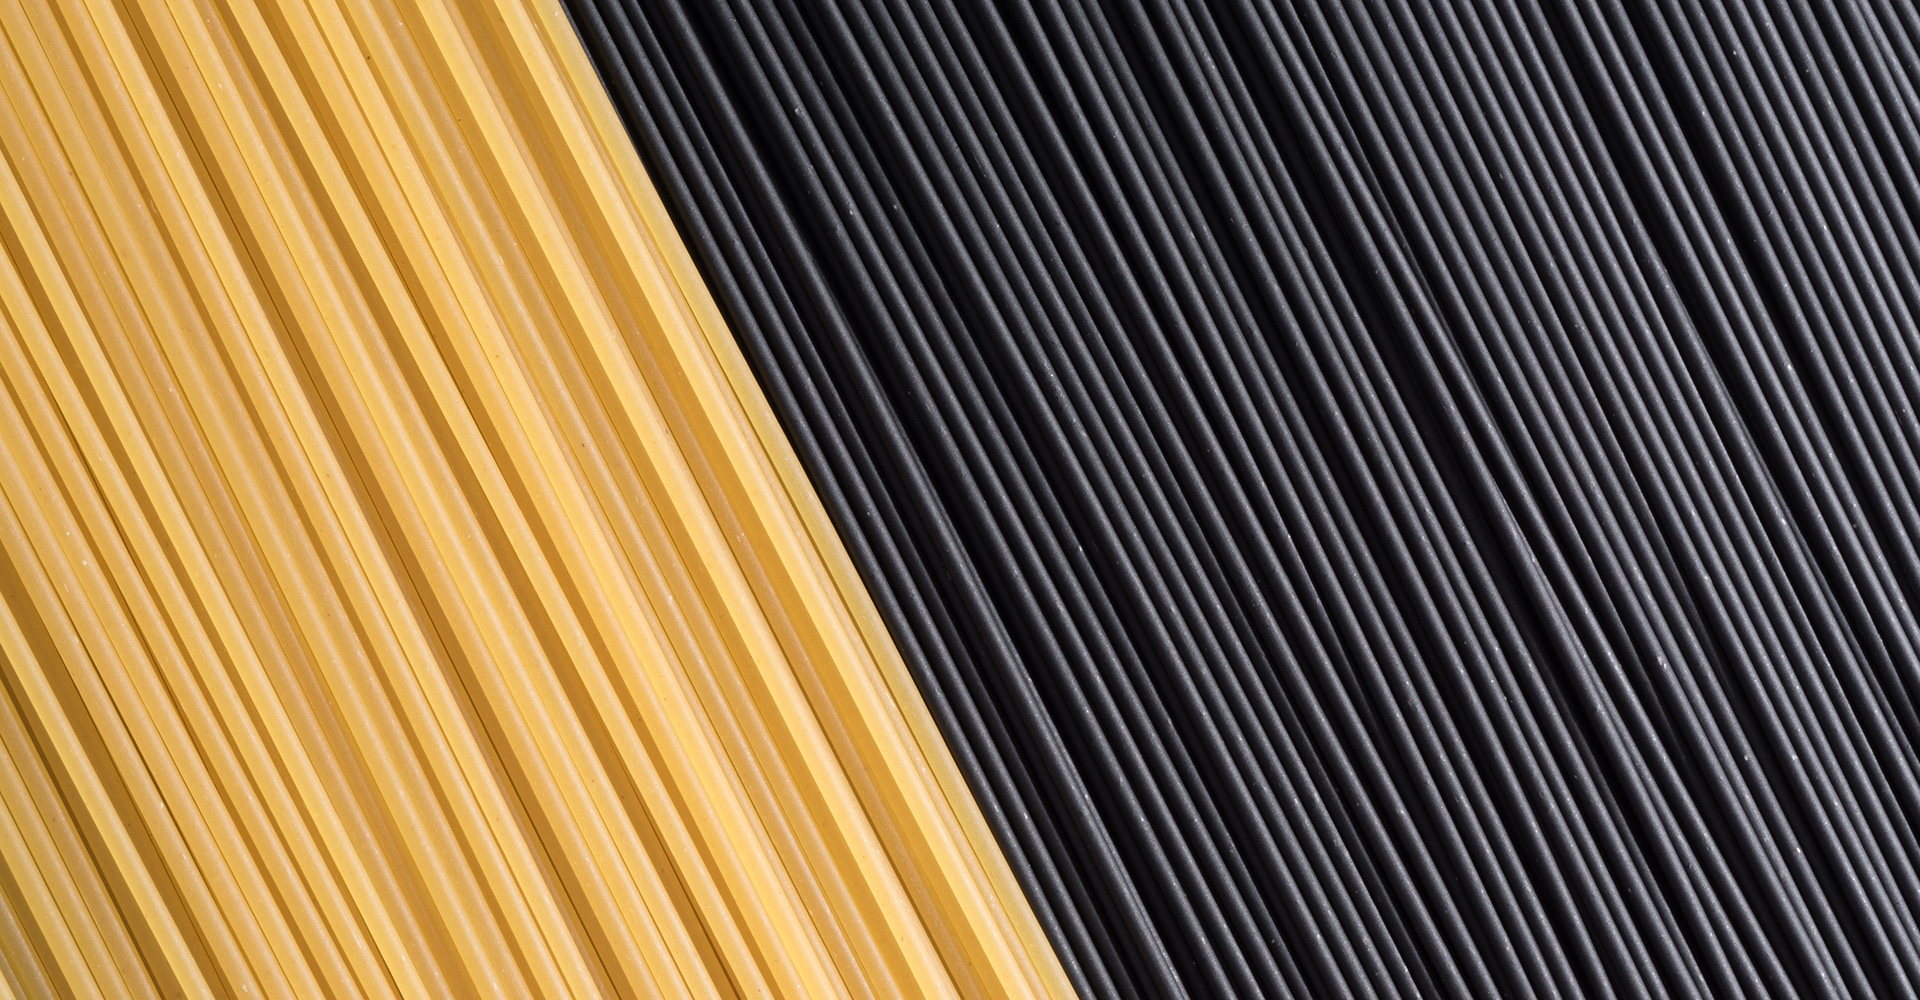 Uncooked Squid ink Spaghetti and Yellow Spaghetti Full Frame Shot, Directly Above View.